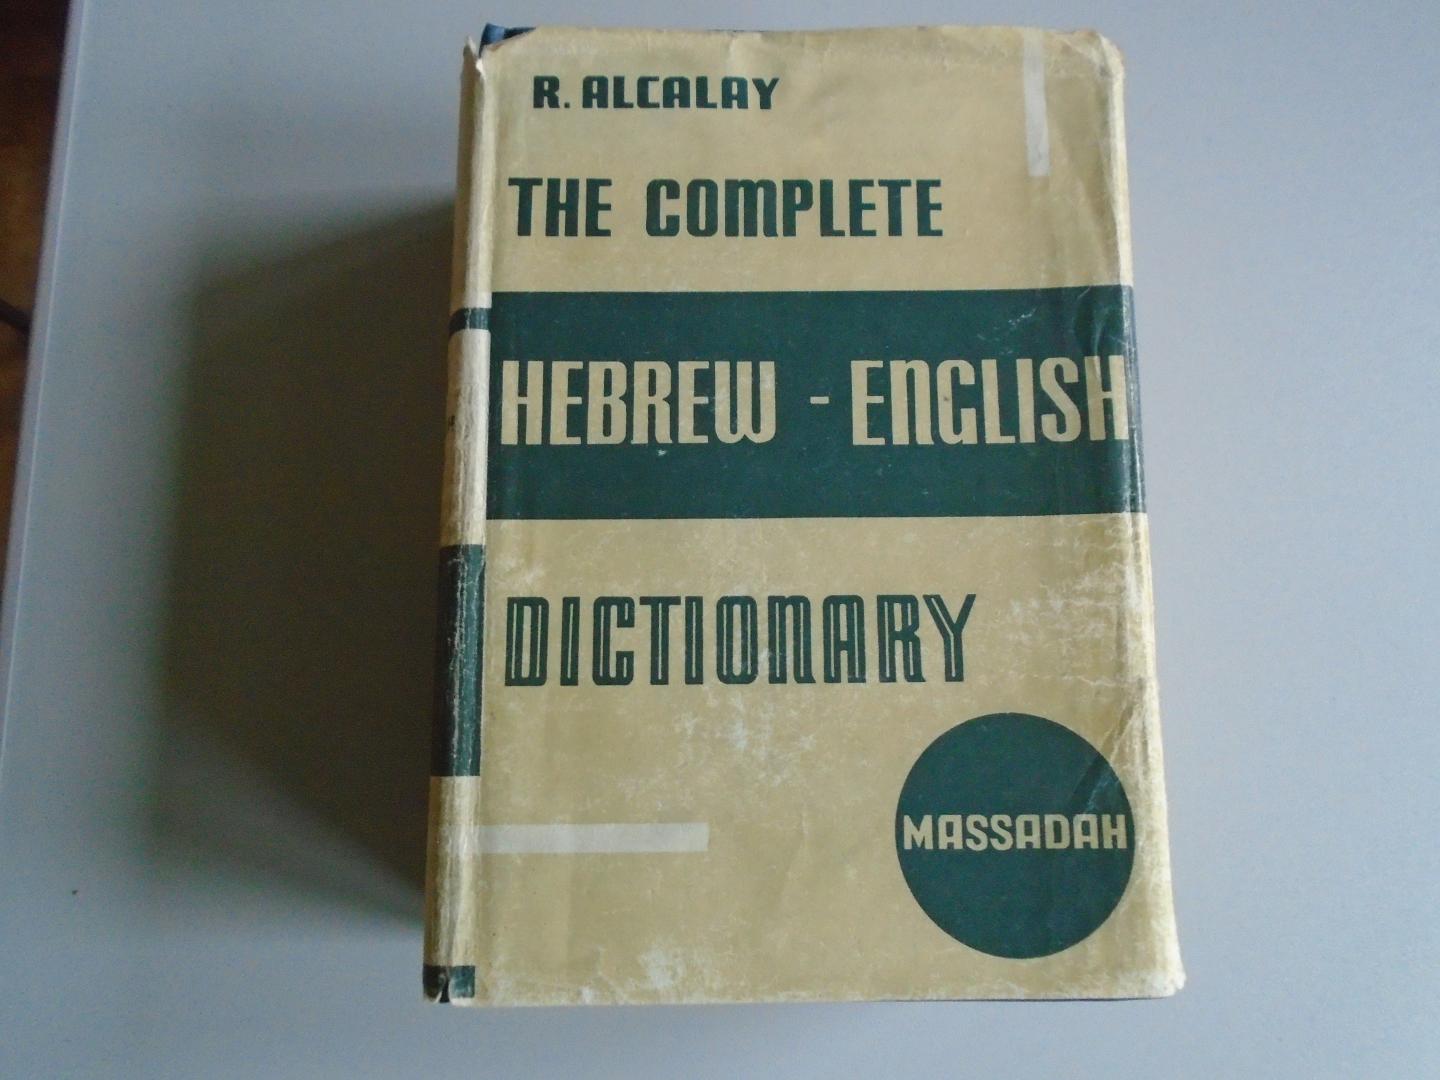 Alcalay, R. - The Complete Hebrew - English Dictionary